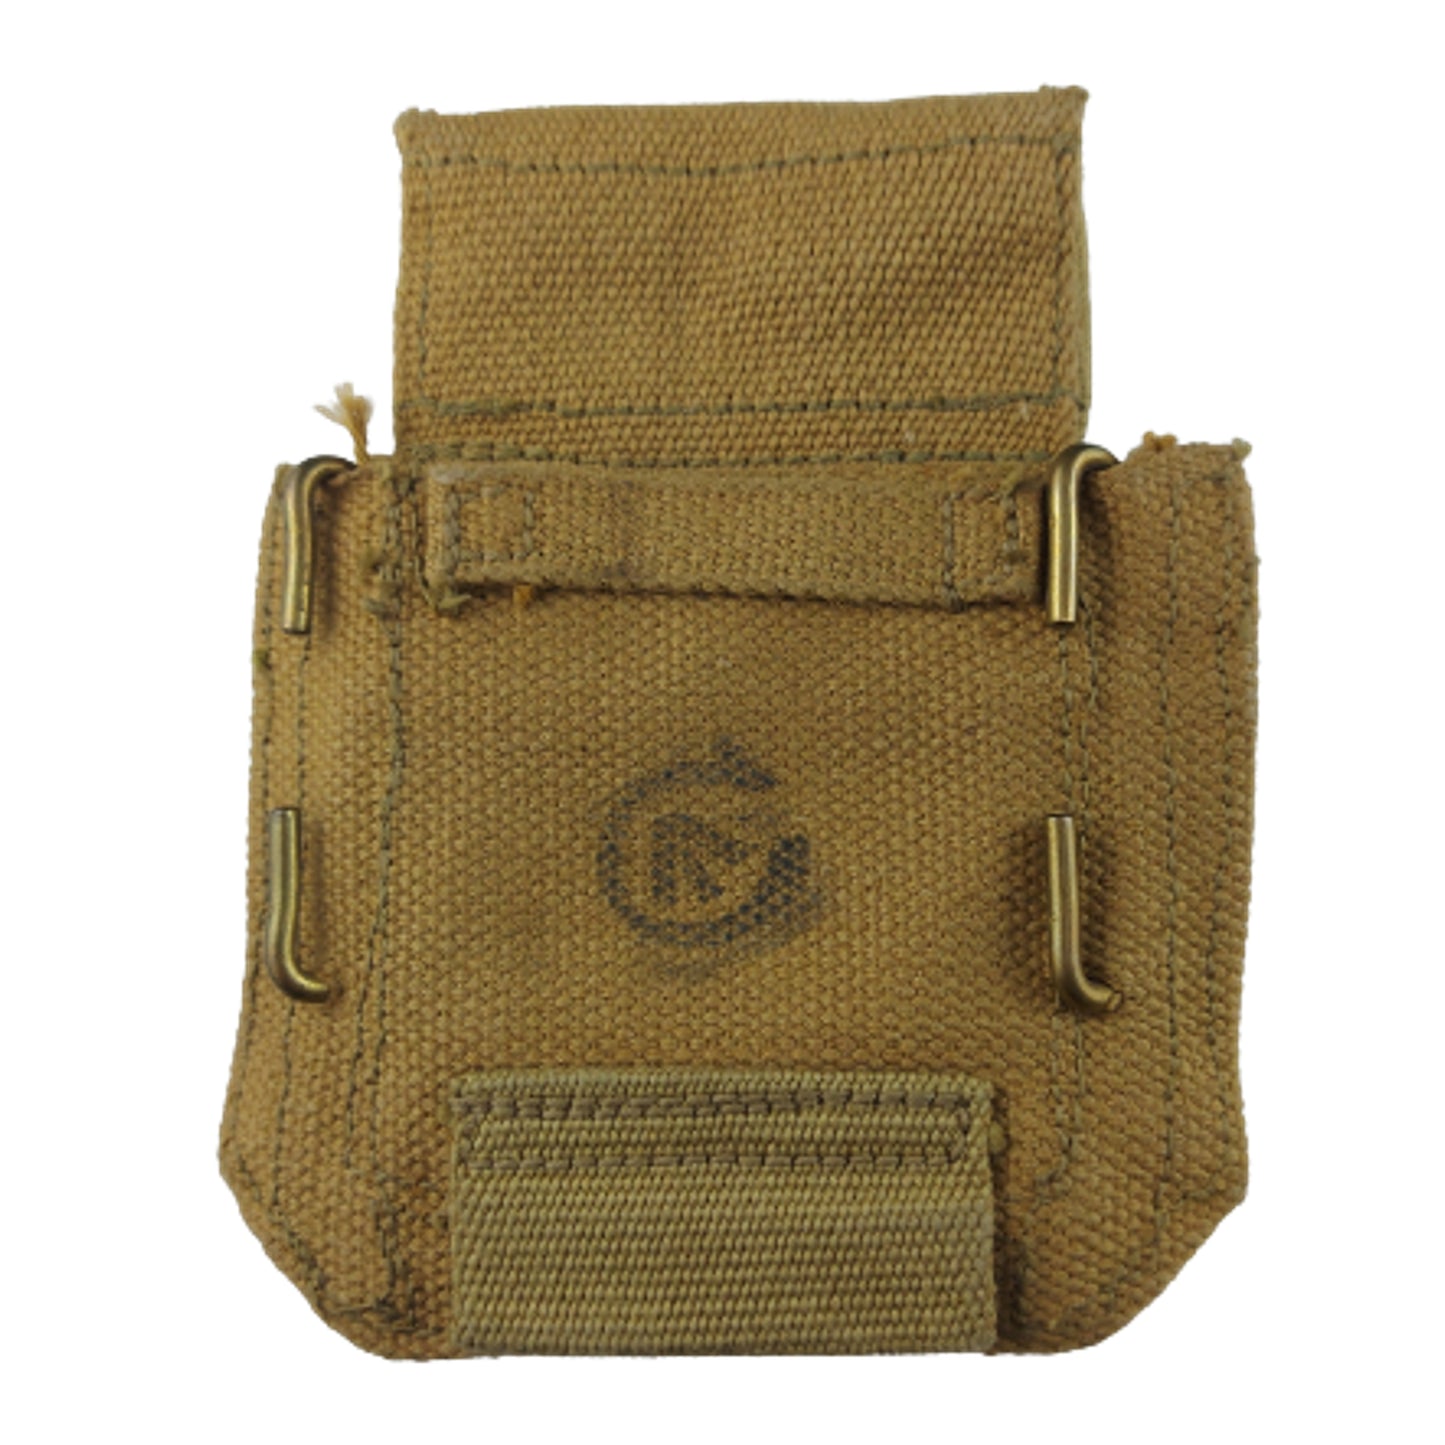 WW2 Canadian P37 compass Pouch